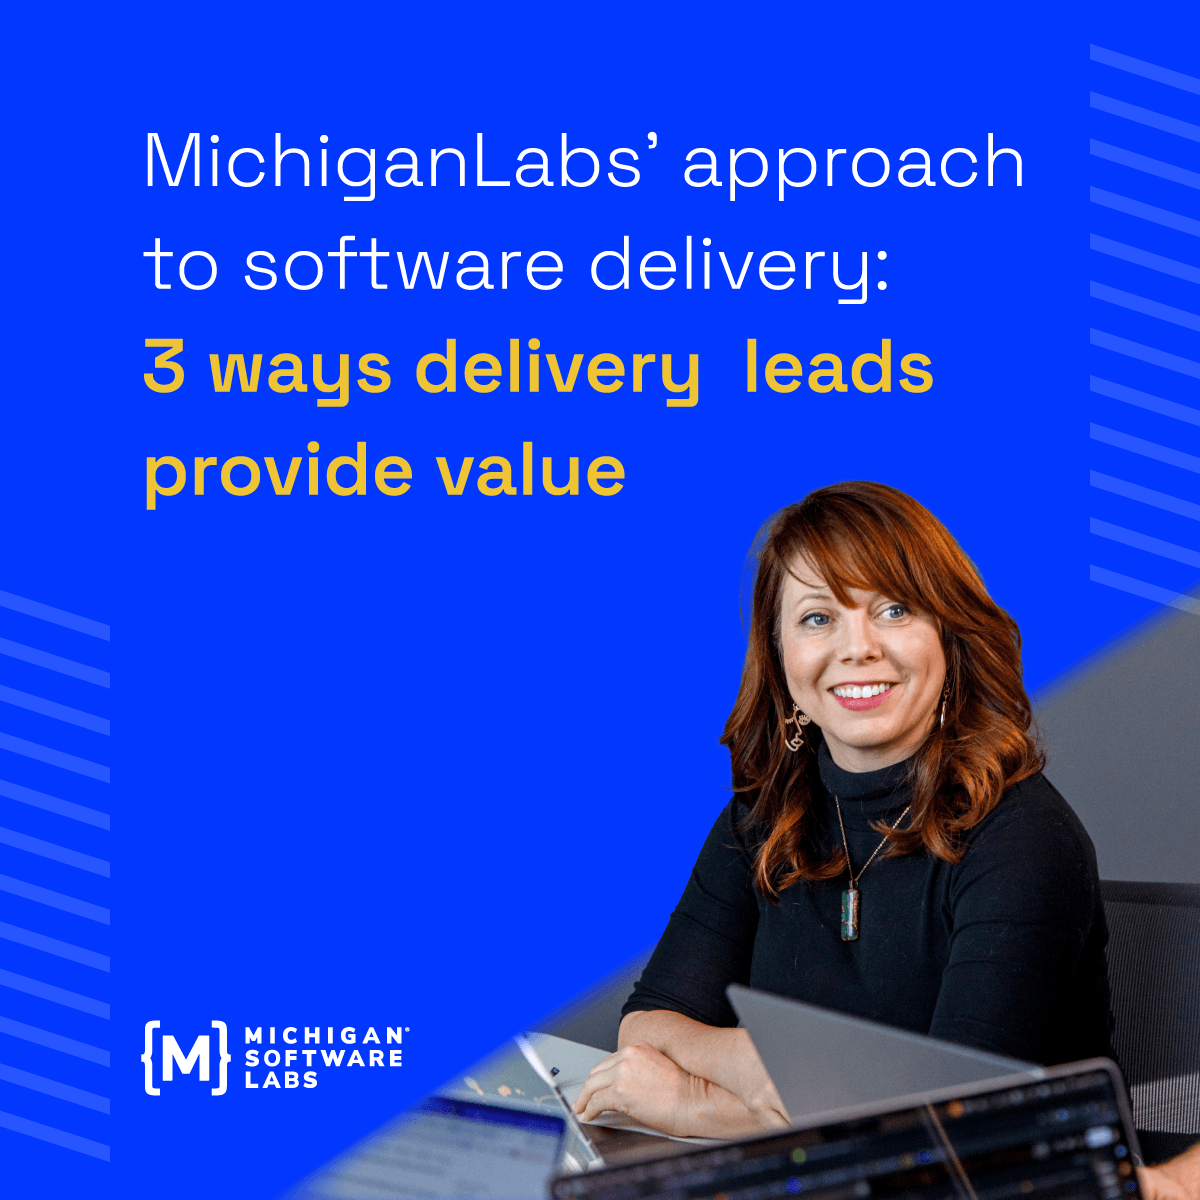 MichiganLabs’ approach to software delivery: 3 ways delivery leads provide value